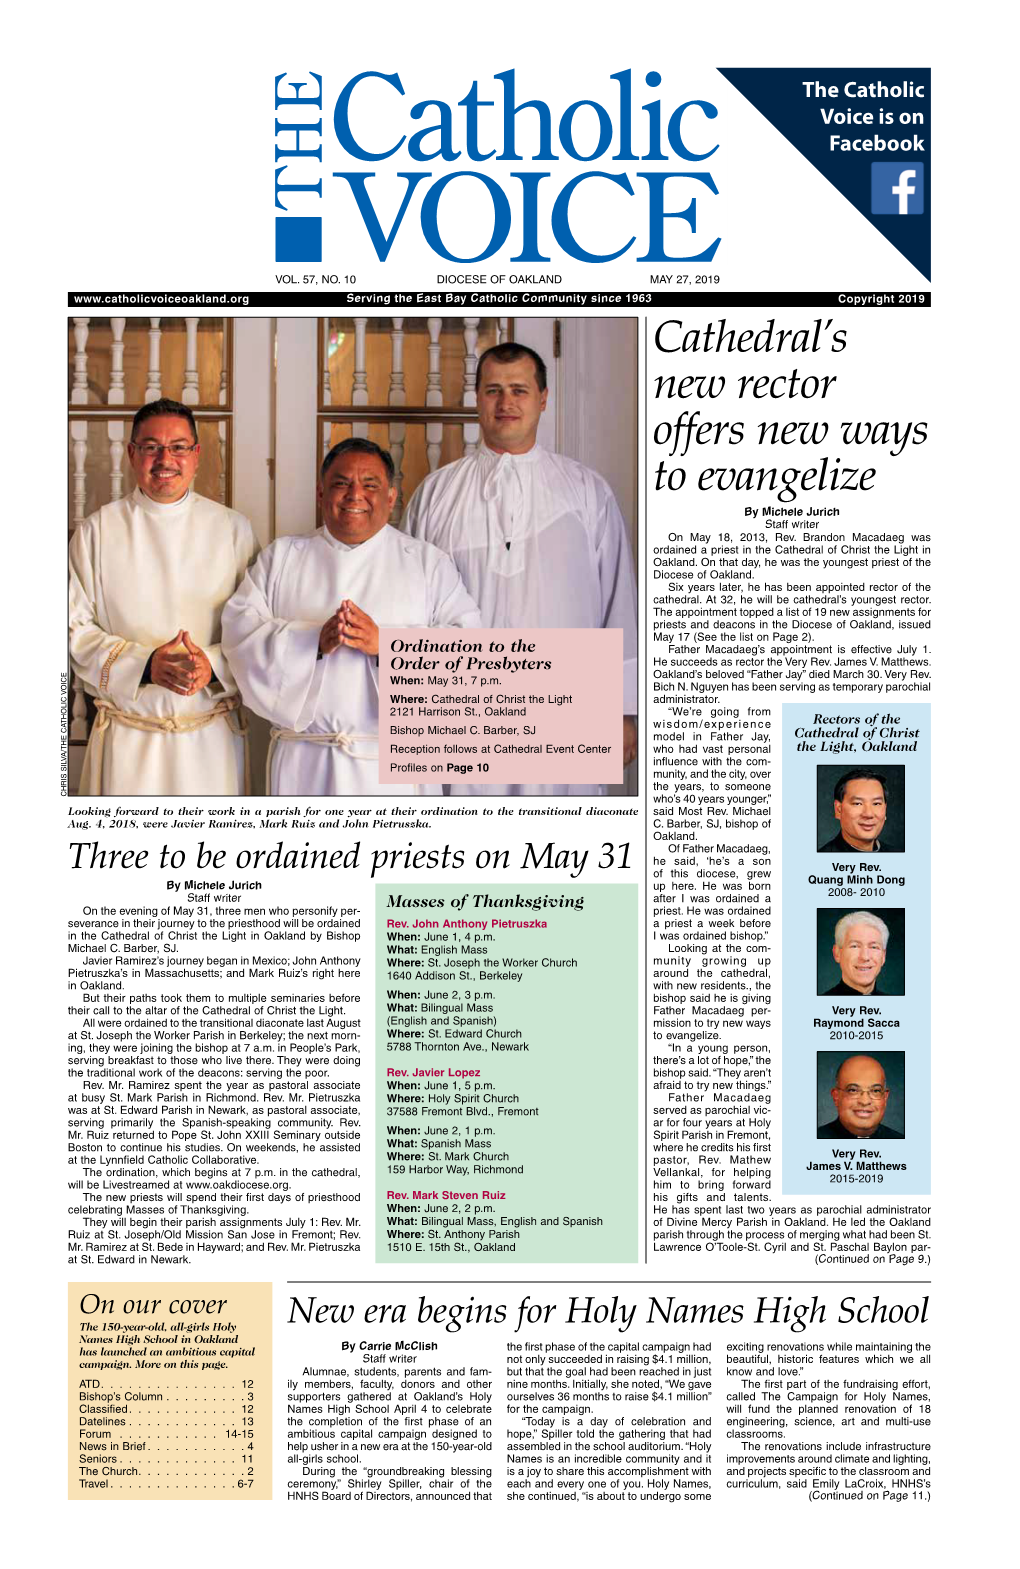 Cathedral's New Rector Offers New Ways to Evangelize